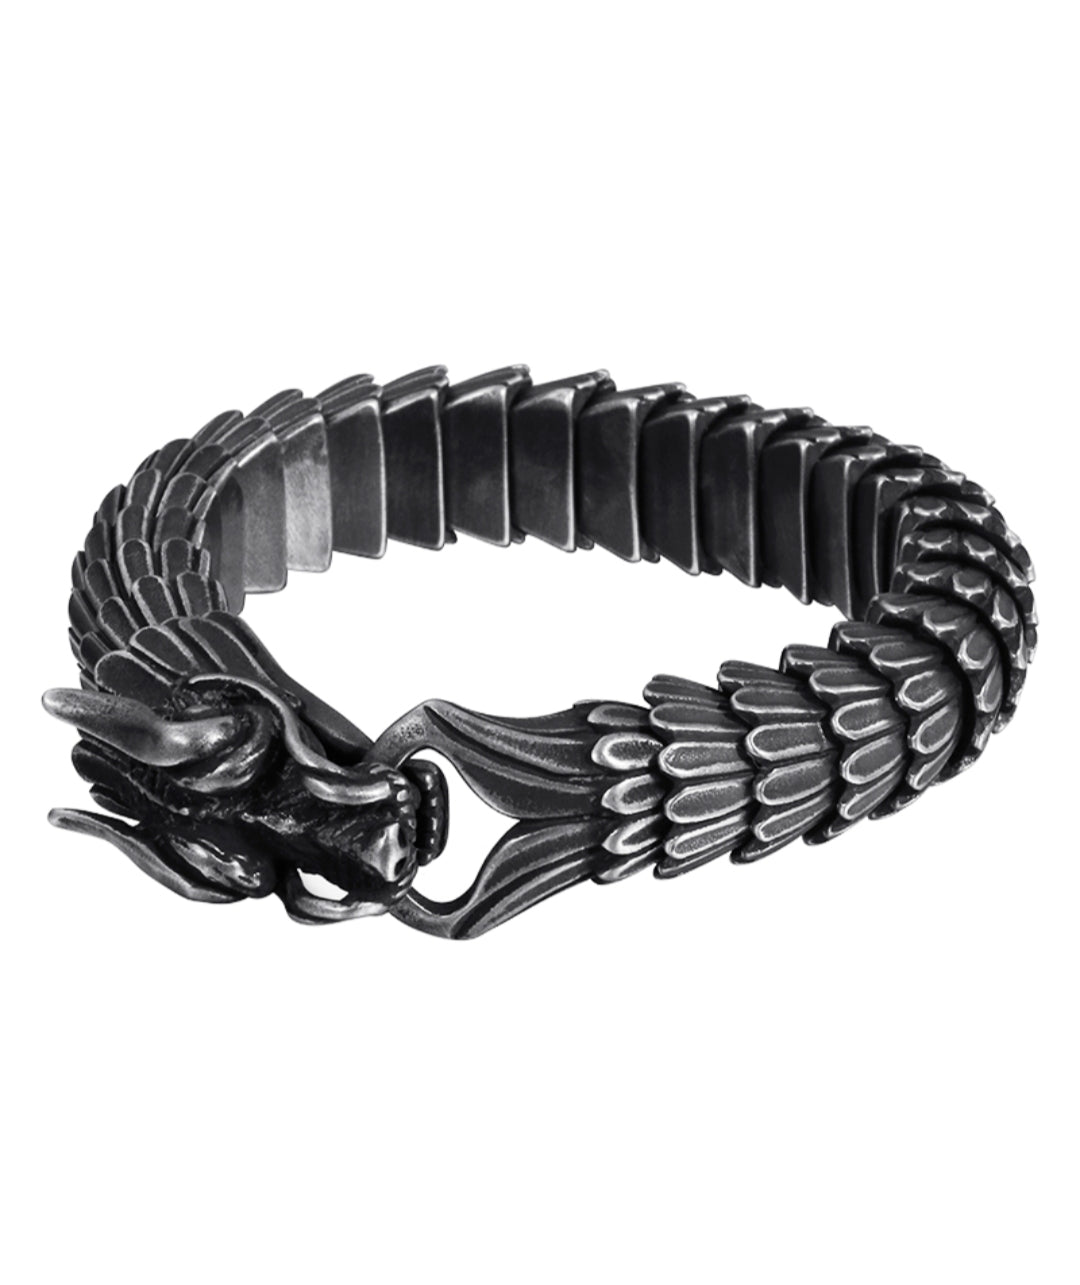 RARE PRINCE by CARAT SUTRA | Unique Vintage Dark/Light Oxidized Dragon Bracelet | 925 Sterling Silver Dark/Light Oxidized Bracelet | Unisex Jewelry | With Certificate of Authenticity and 925 Hallmark - caratsutra